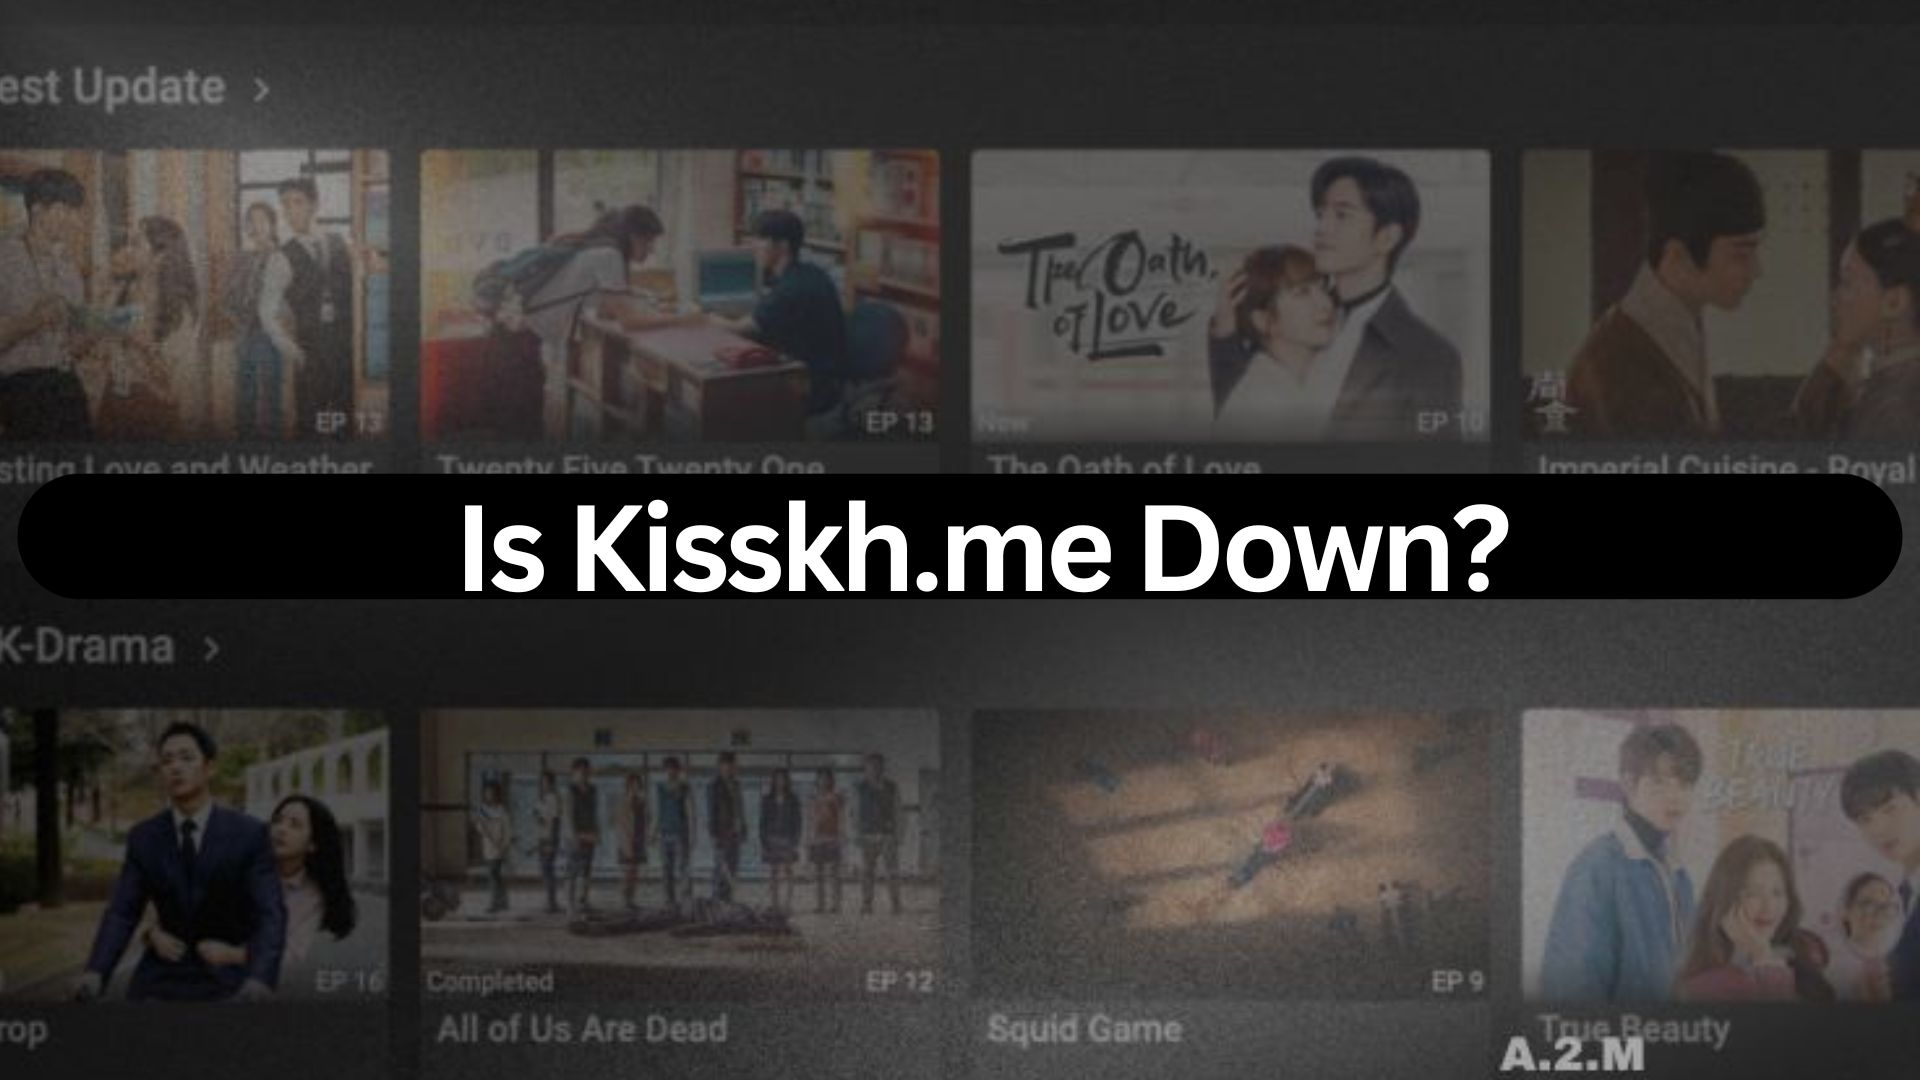 The Curious Case of Kisskh.me: Is It Down or Just a Glitch?